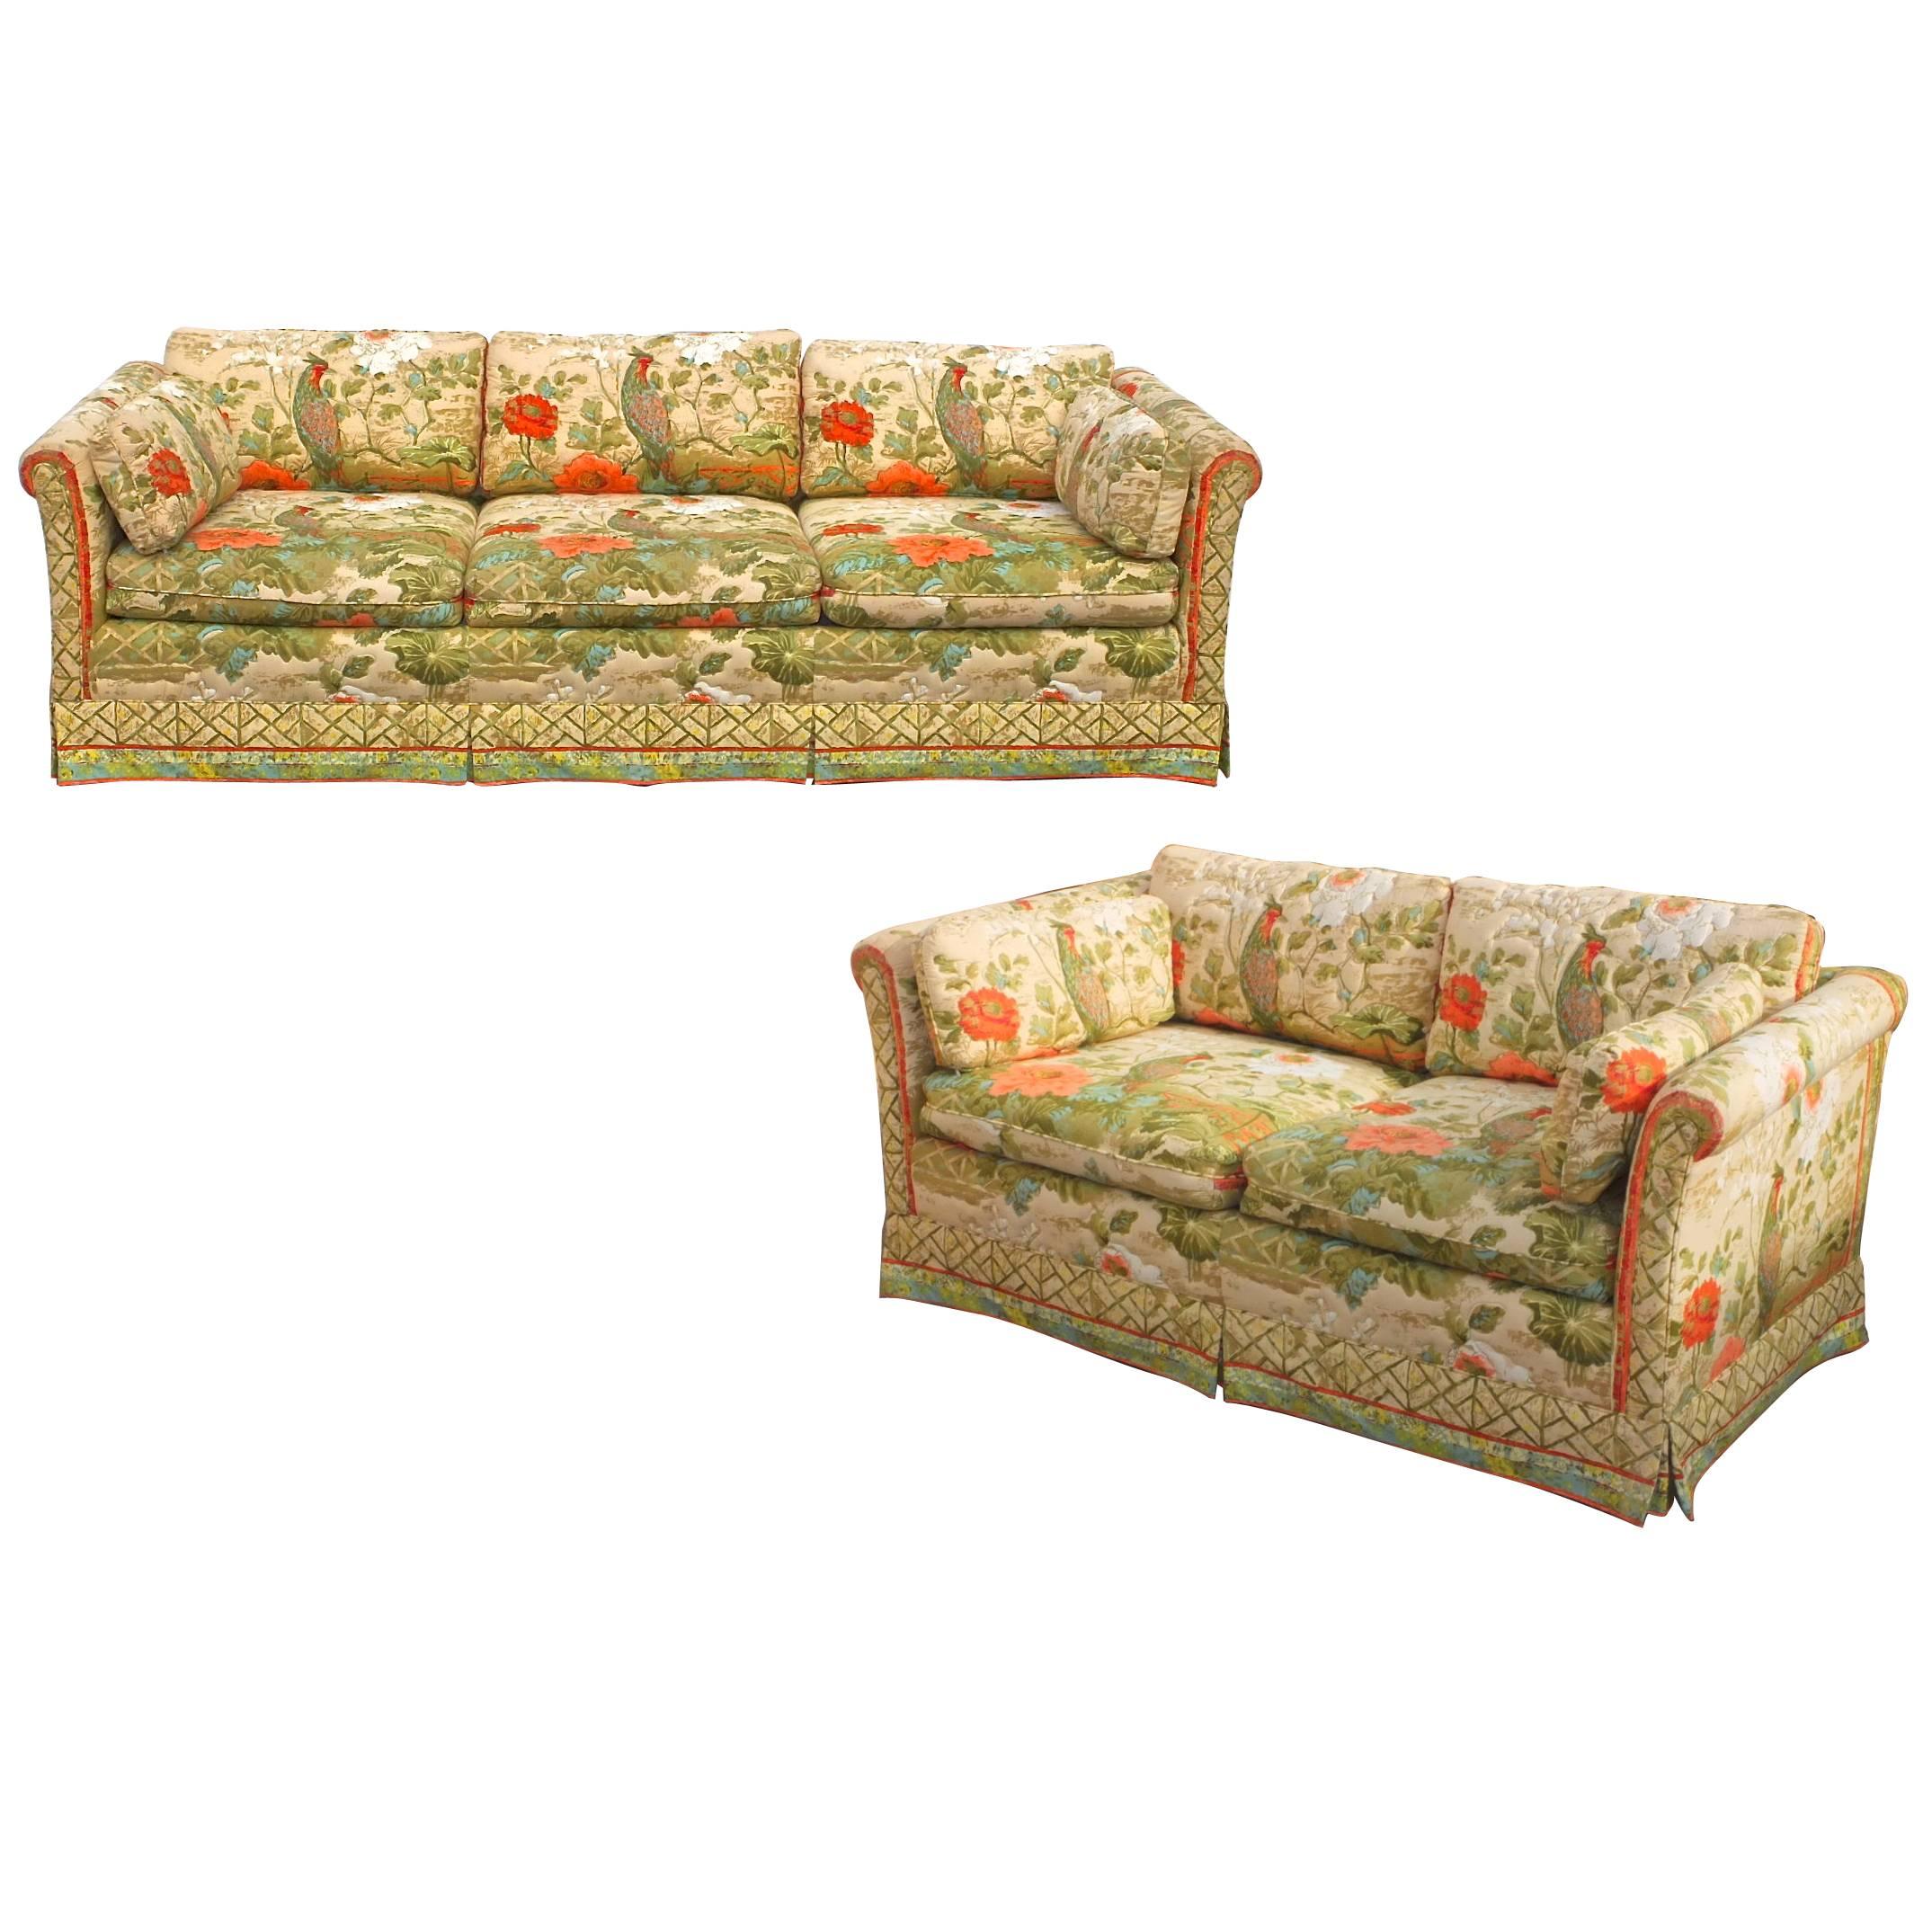 “Palm Beach" Sofa and Love Seat in Greeff Peony Garden